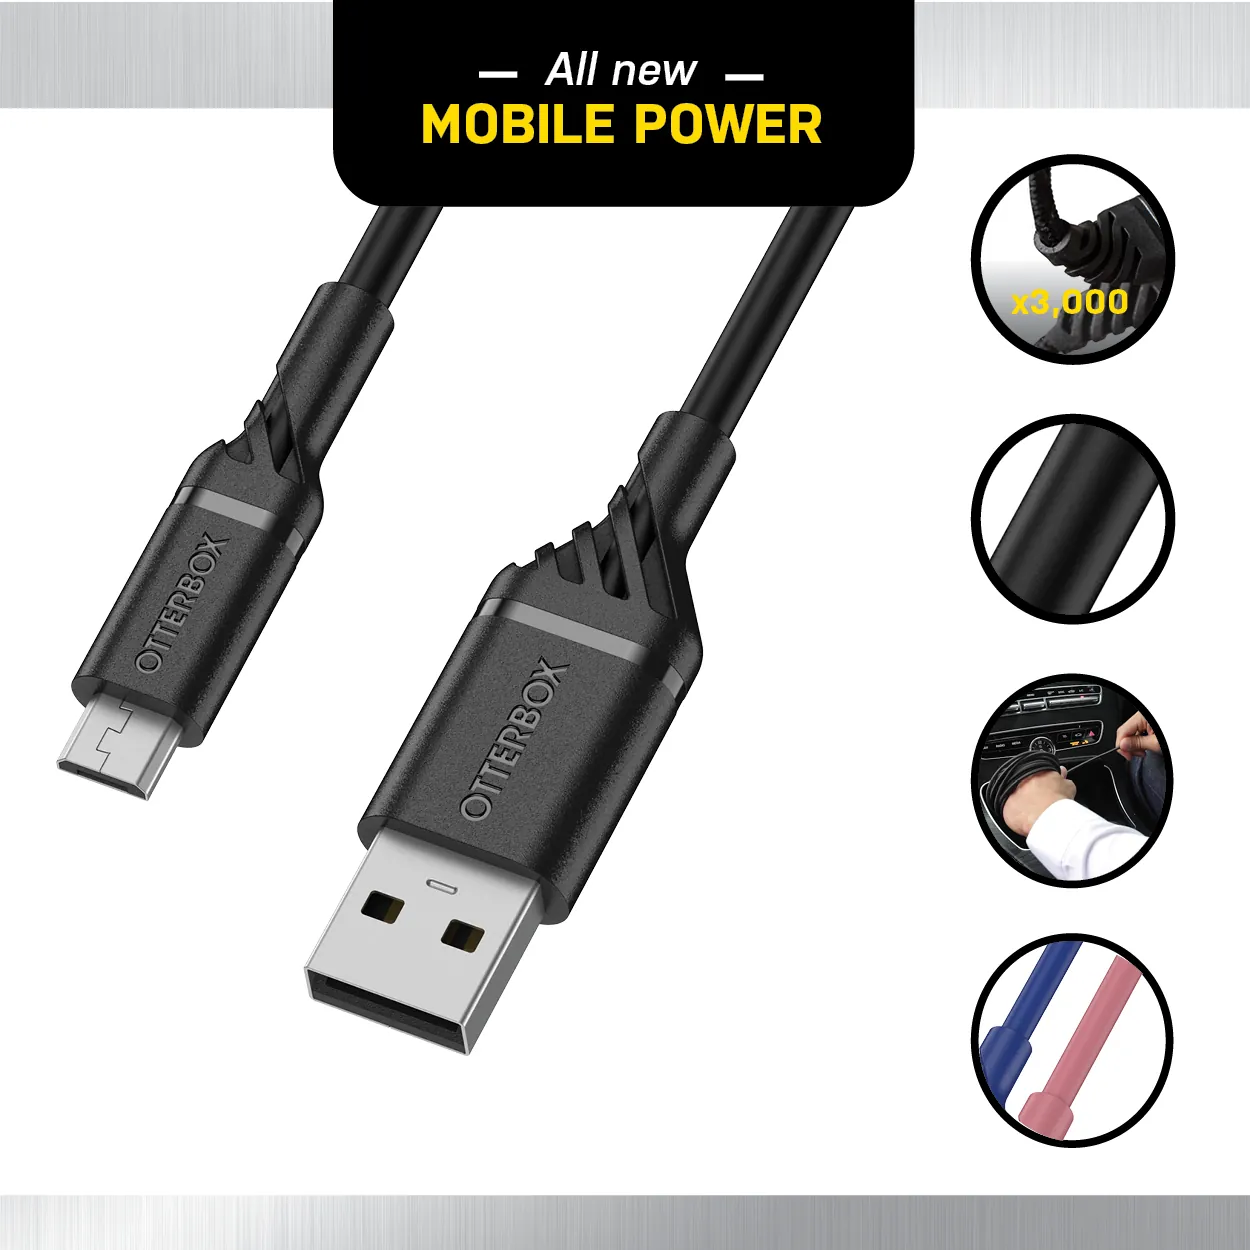 Lightning to USB-A Cables from OtterBox are Made to Last